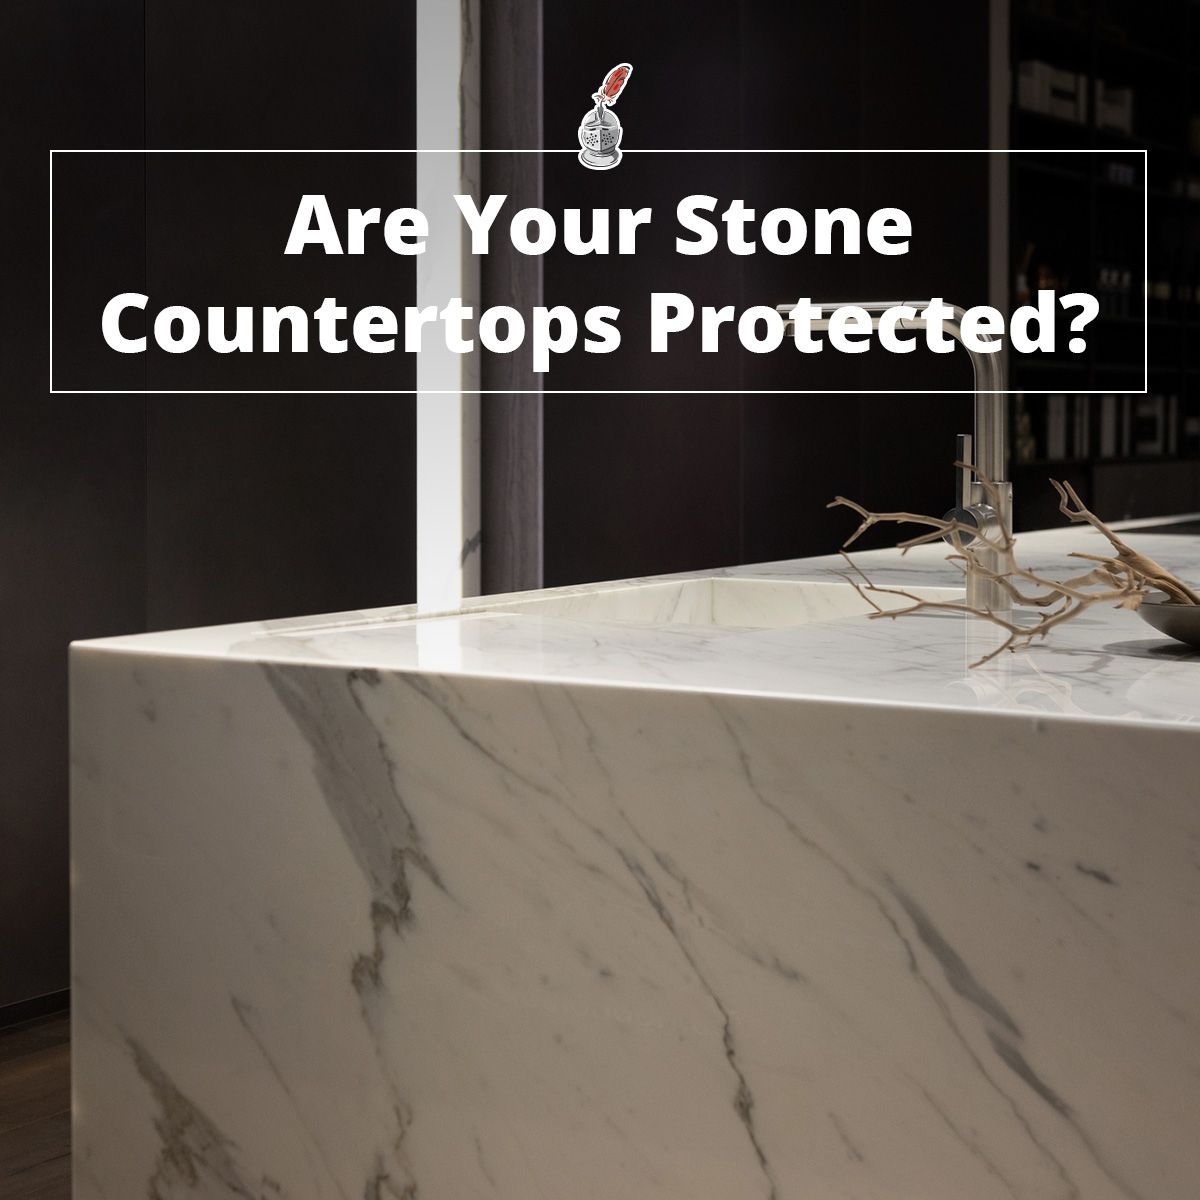 Are Your Stone Countertops Protected?